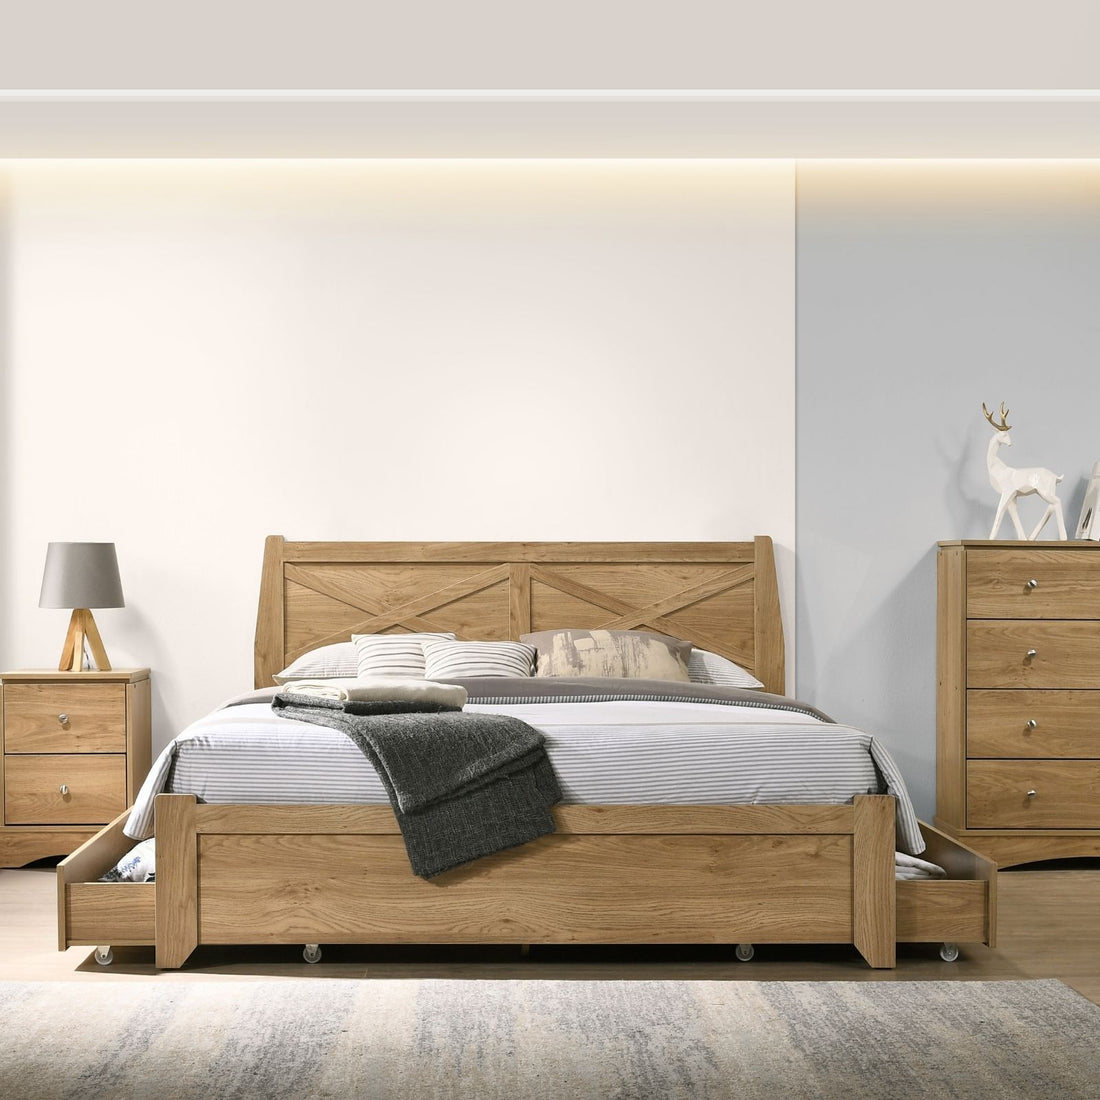 Natural Wooden Bed Frame with Storage Drawers - King